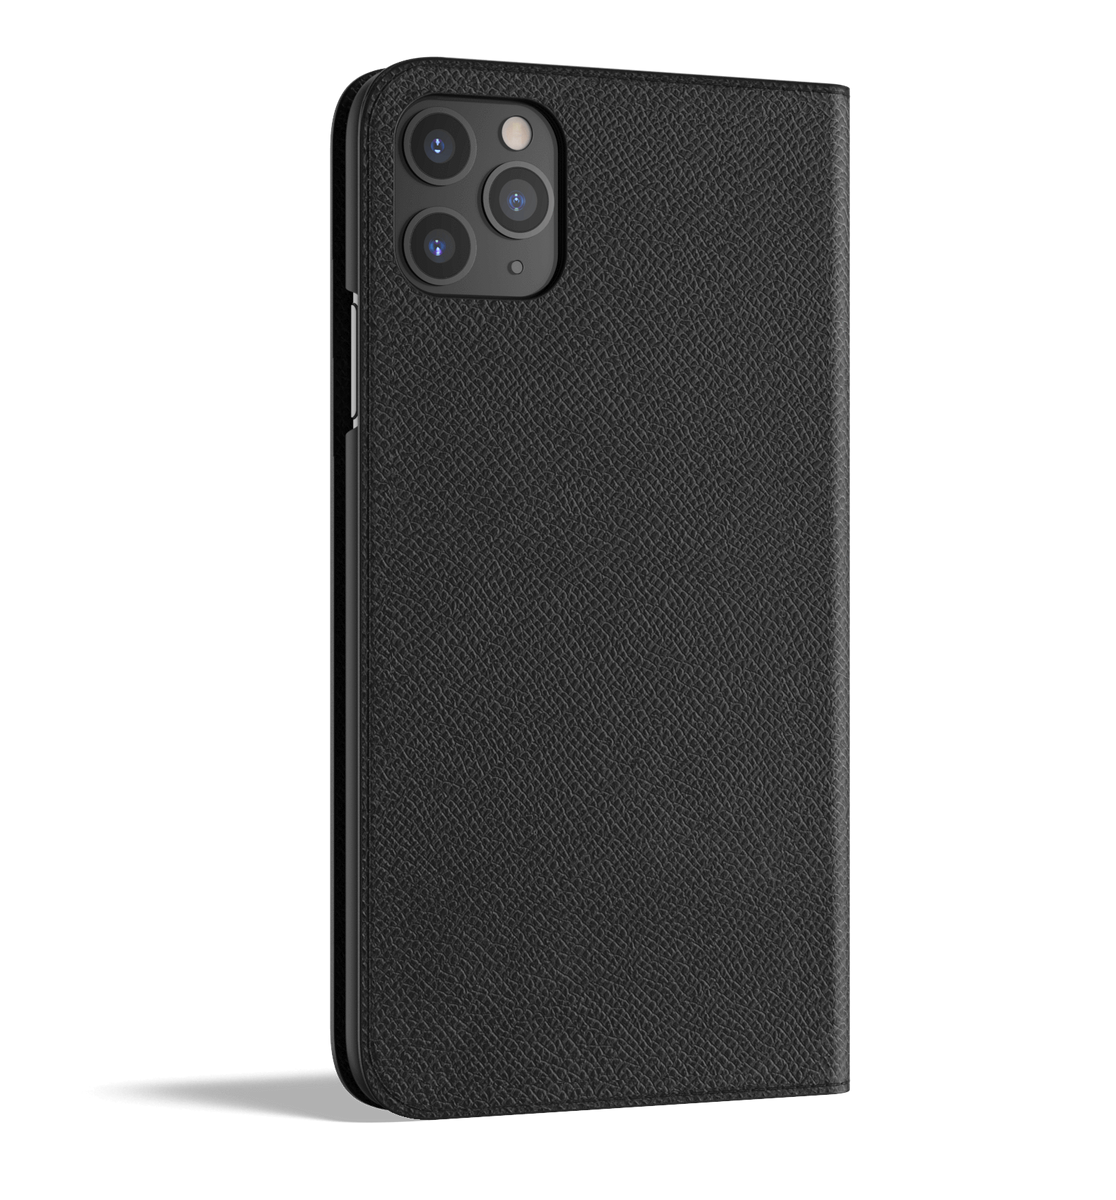 Vaja Stock Folio iPhone 11 Pro Wallet Leather Case with Stand Function Floater Black